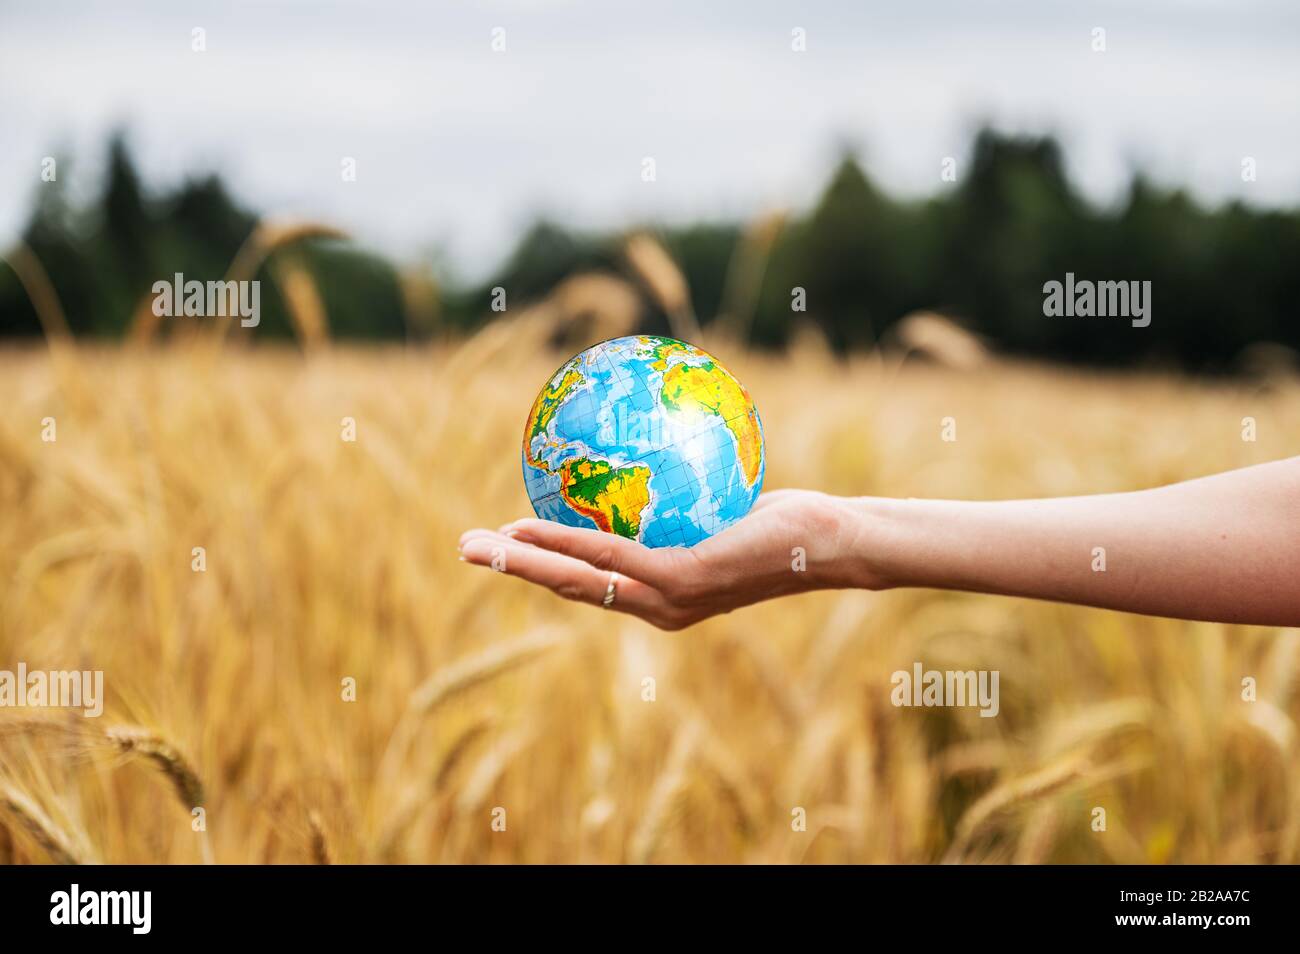 Female hand holding a globe in the palm with a beautiful wheat field on the background. Save the environment concept. Stock Photo